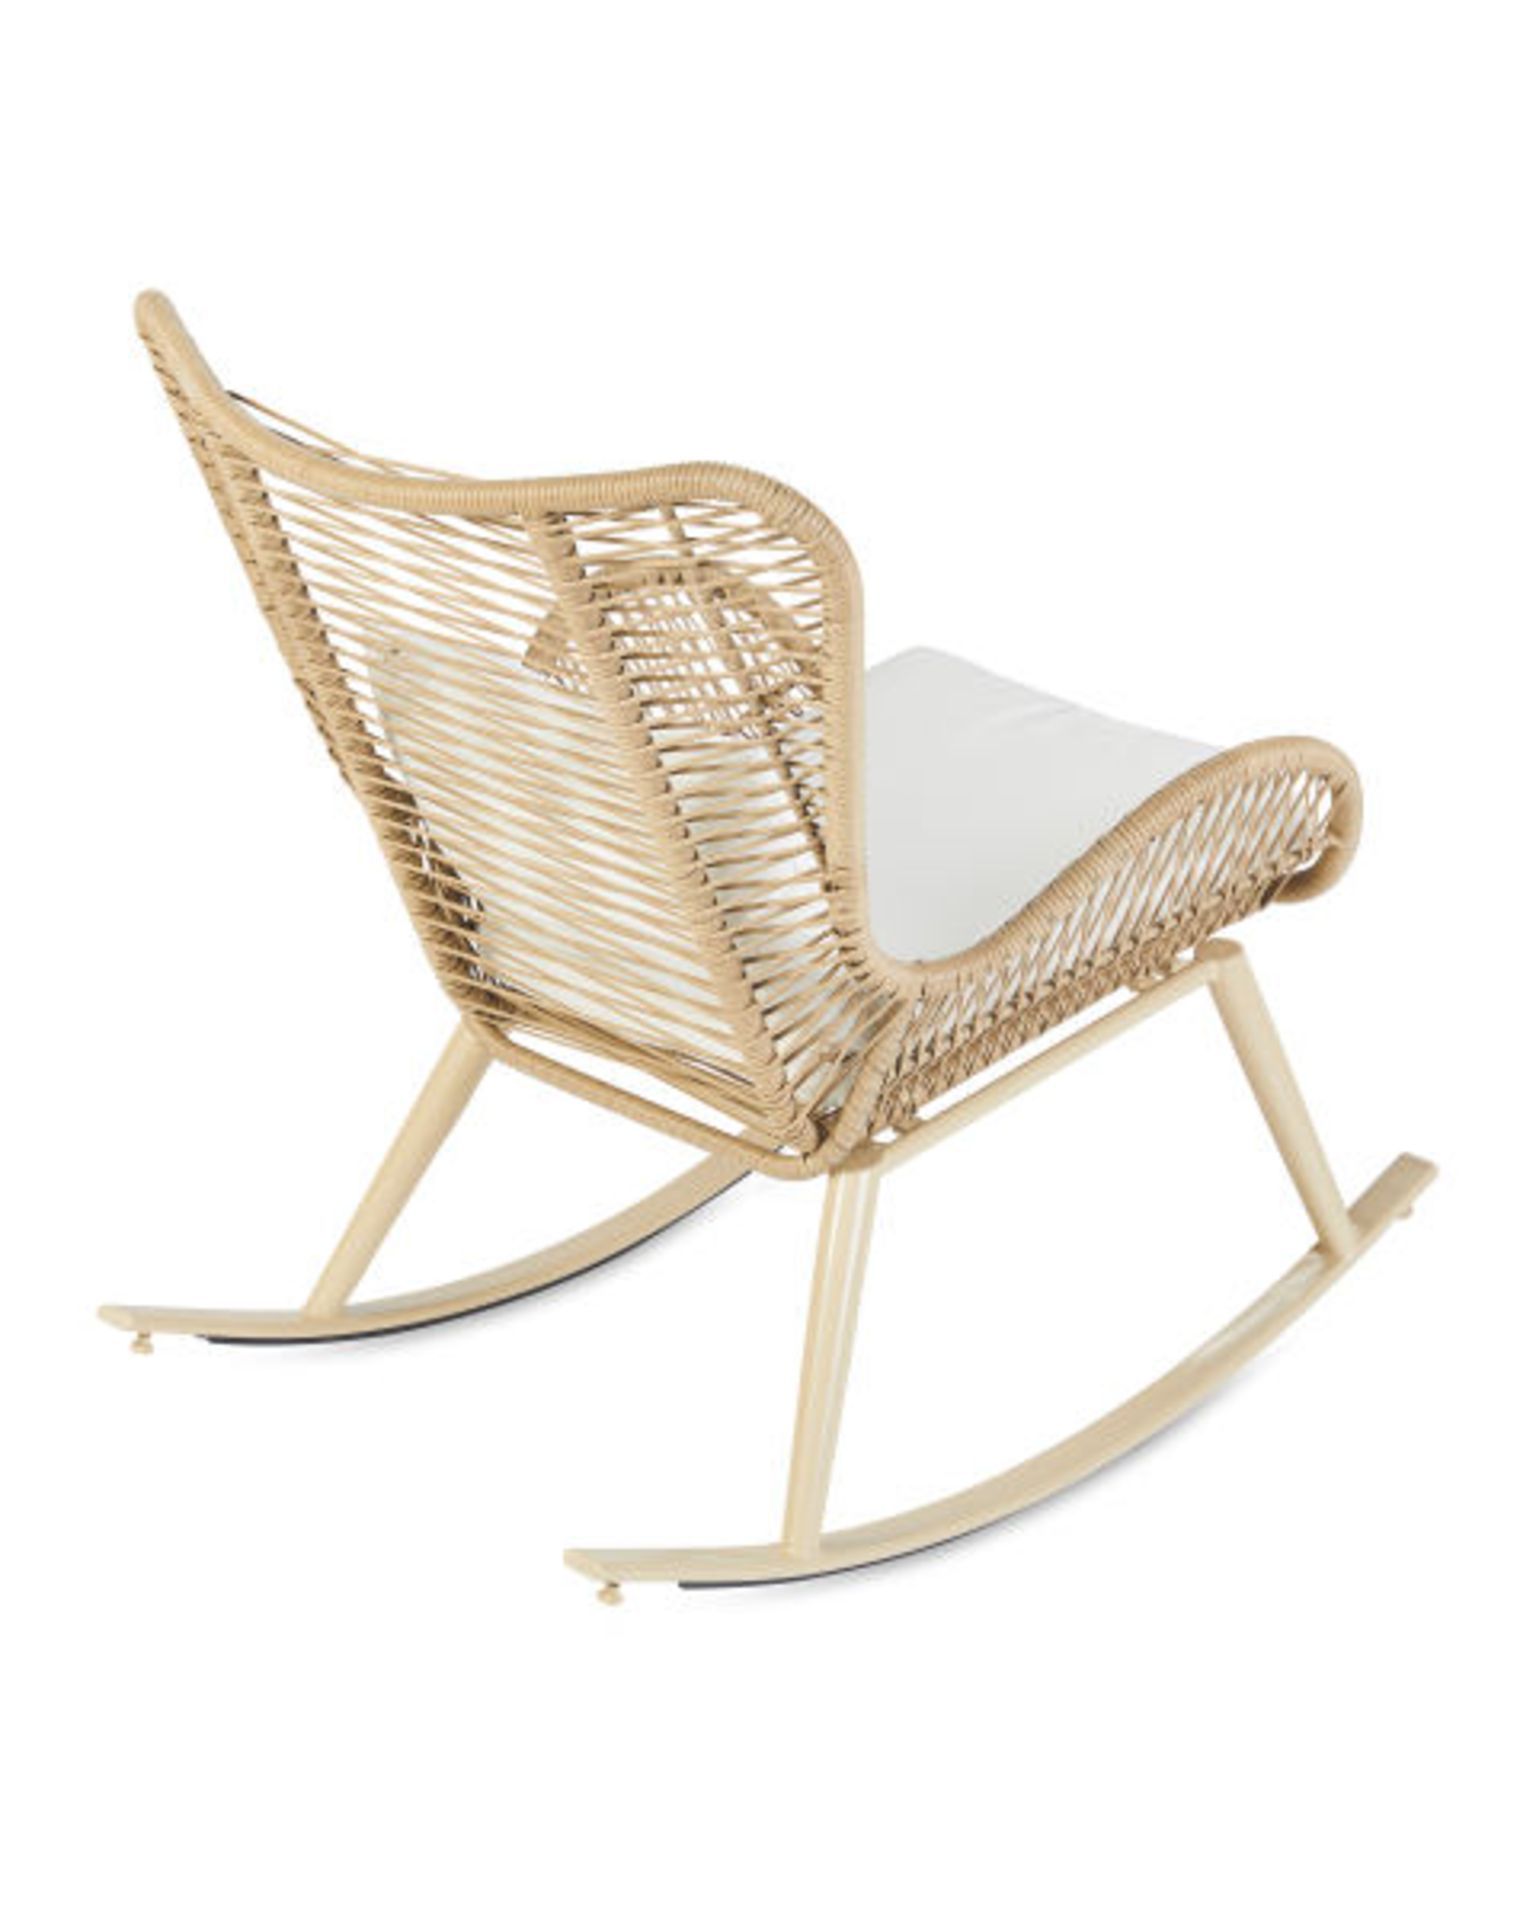 Luxury Rope Effect Rocking Chair. This Luxury Rope Effect Rocking Chair is this seasons must have - Image 3 of 3